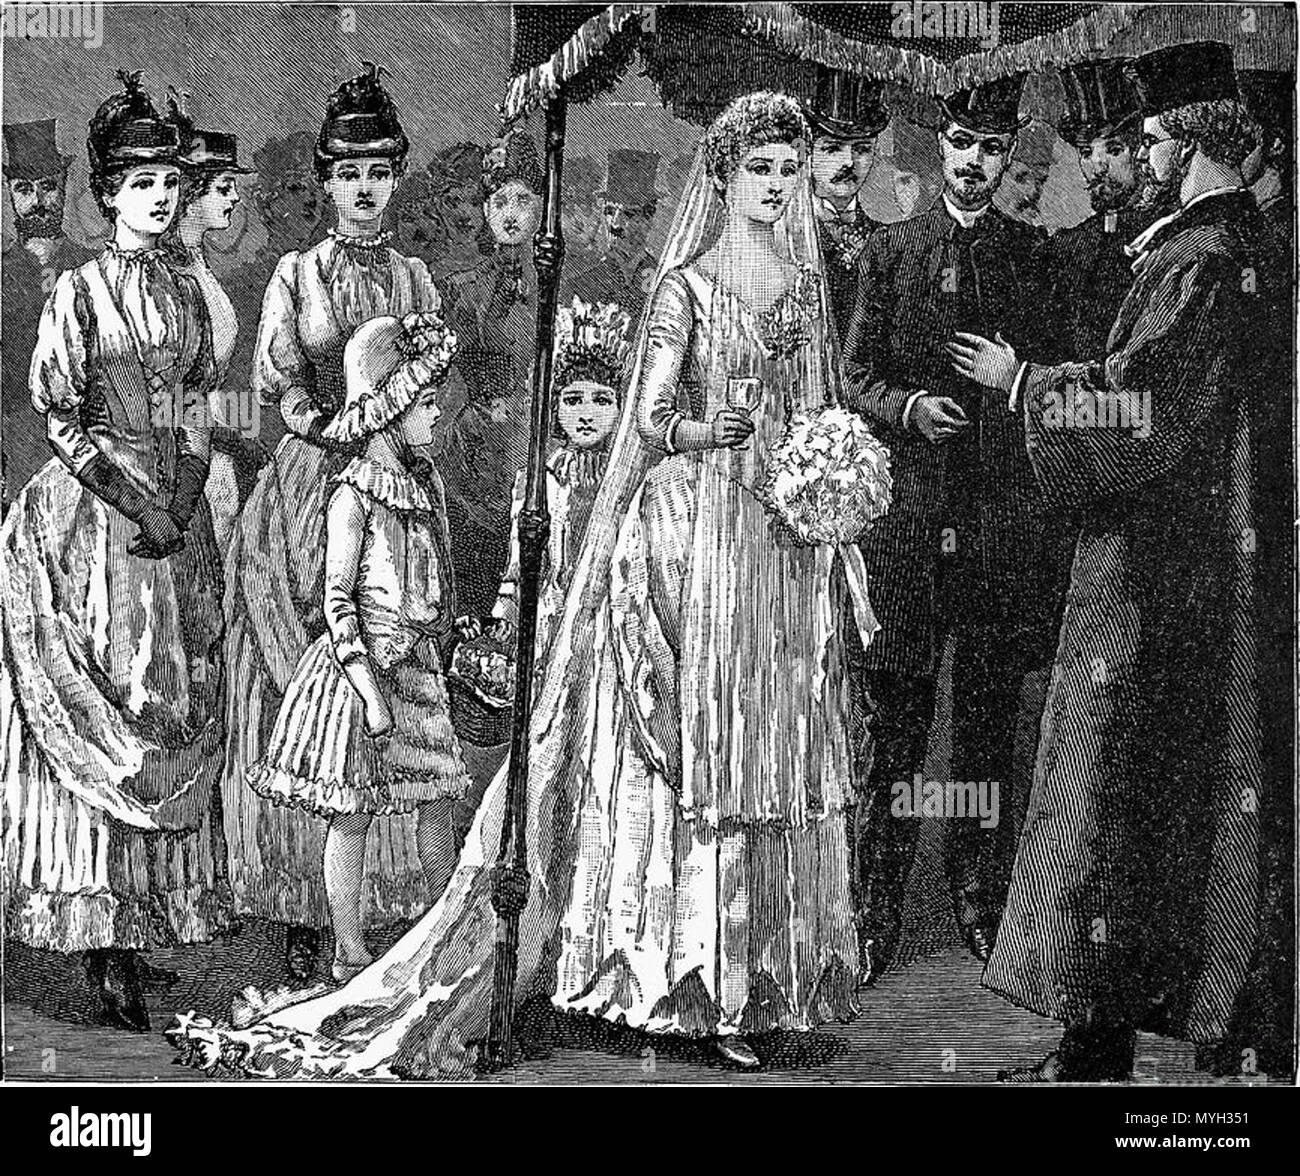 . English: Jewish marriage ceremony c 1892. Original Source: From John Clark Ridpath: Ridpath's universal history: an account of the origin, primitive condition, and race development of the greater division of mankind. (New York : Merrill & Baker, c1899). 1892. R. Taylor (1870-1900); Charles Henry Granger (1812-93) 274 Jewish-wedding-c1892-granger Stock Photo